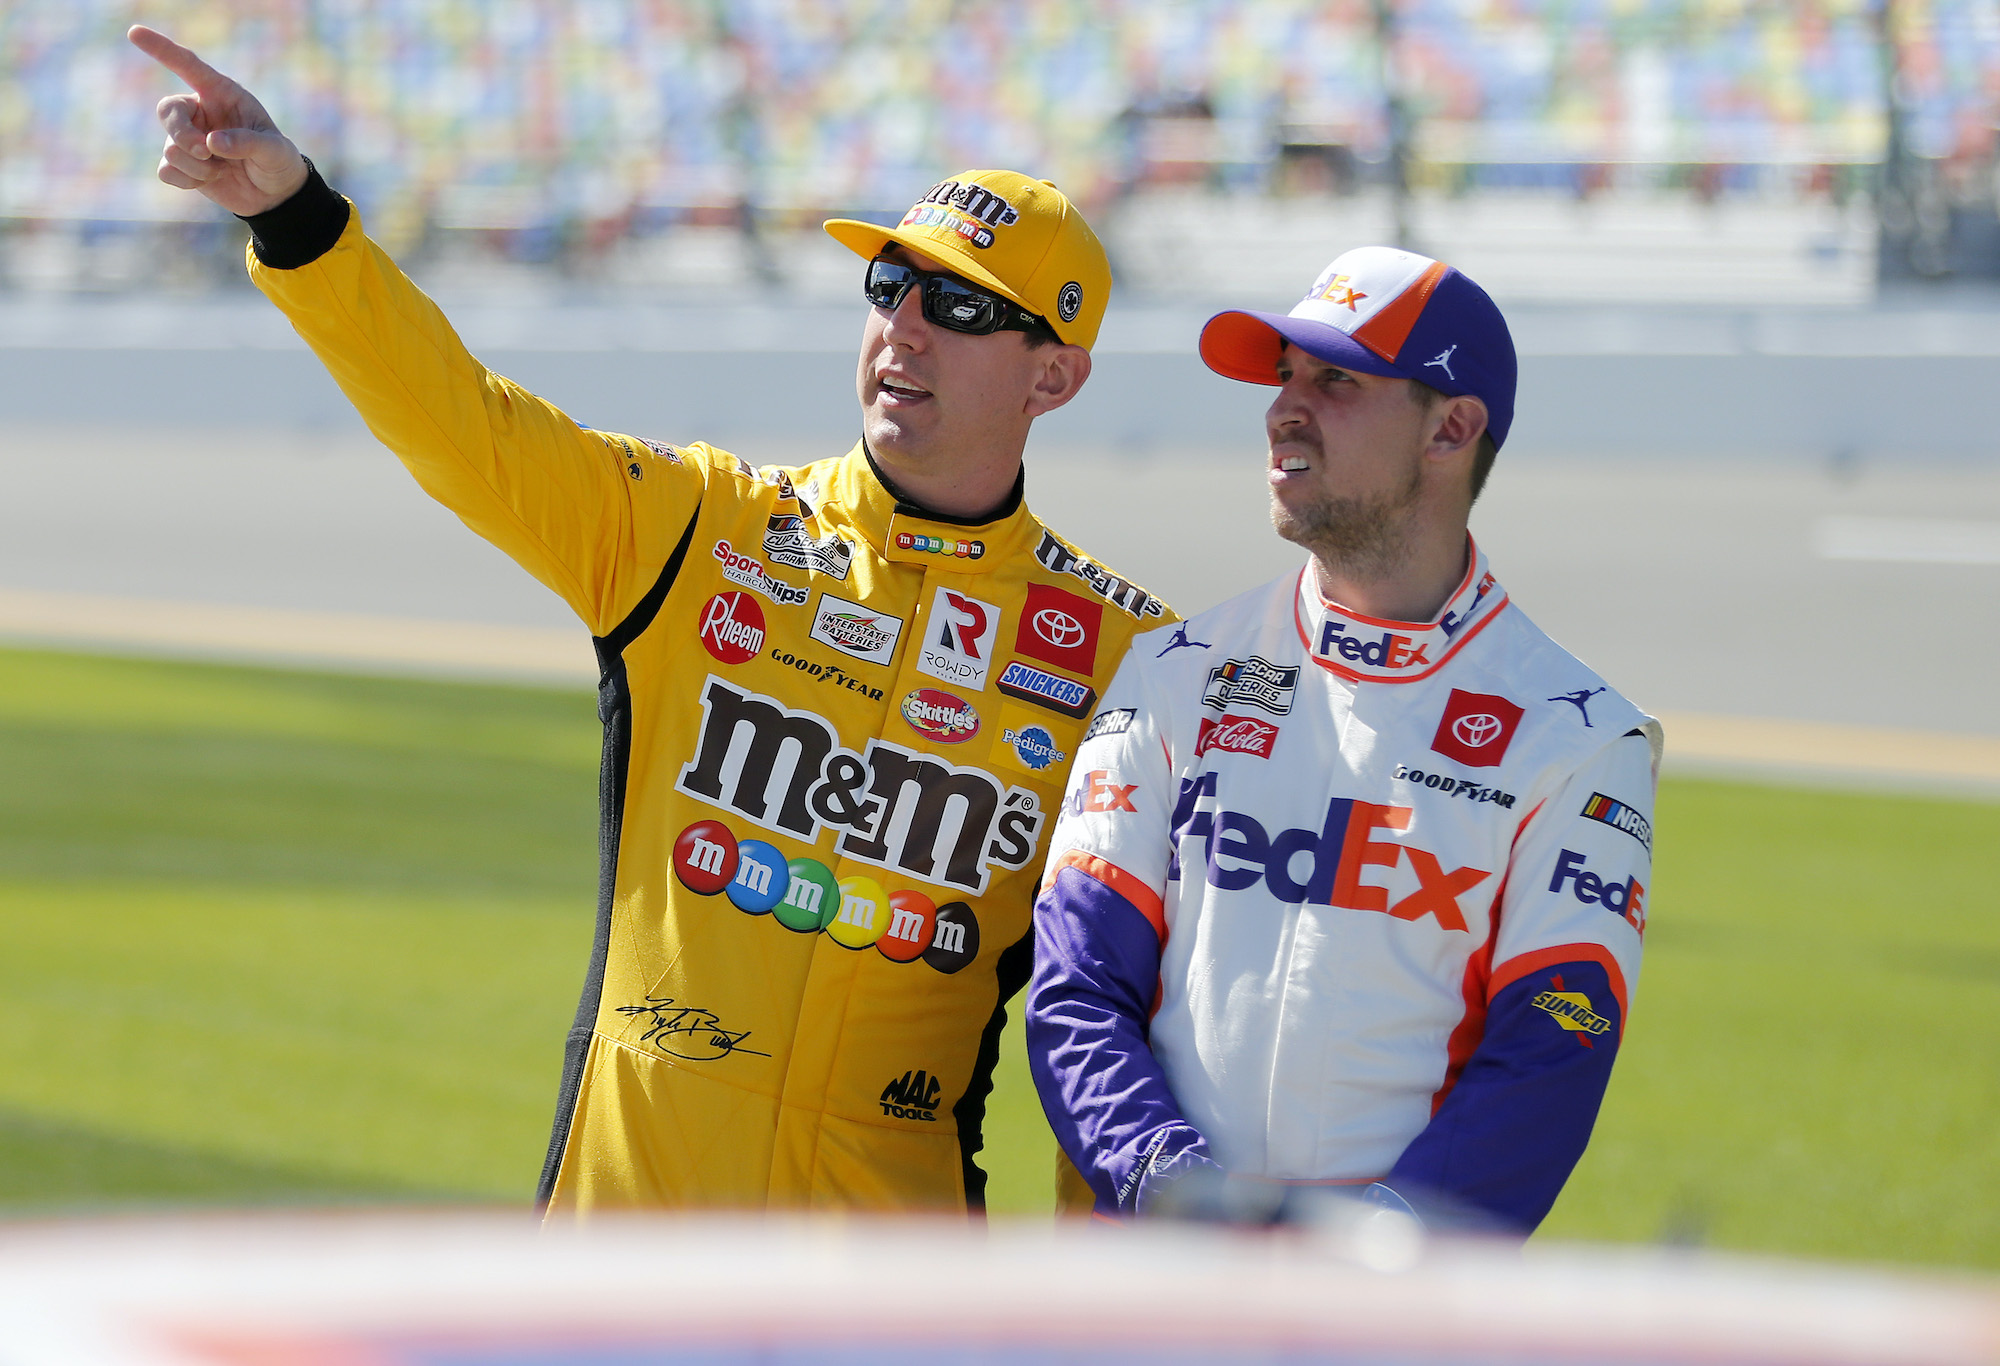 Denny Hamlin Speaks Glowingly of Kyle Busch’s Influence on His Career, and Details Why His JGR Teammate Rejected Potential Ride at 23XI Racing